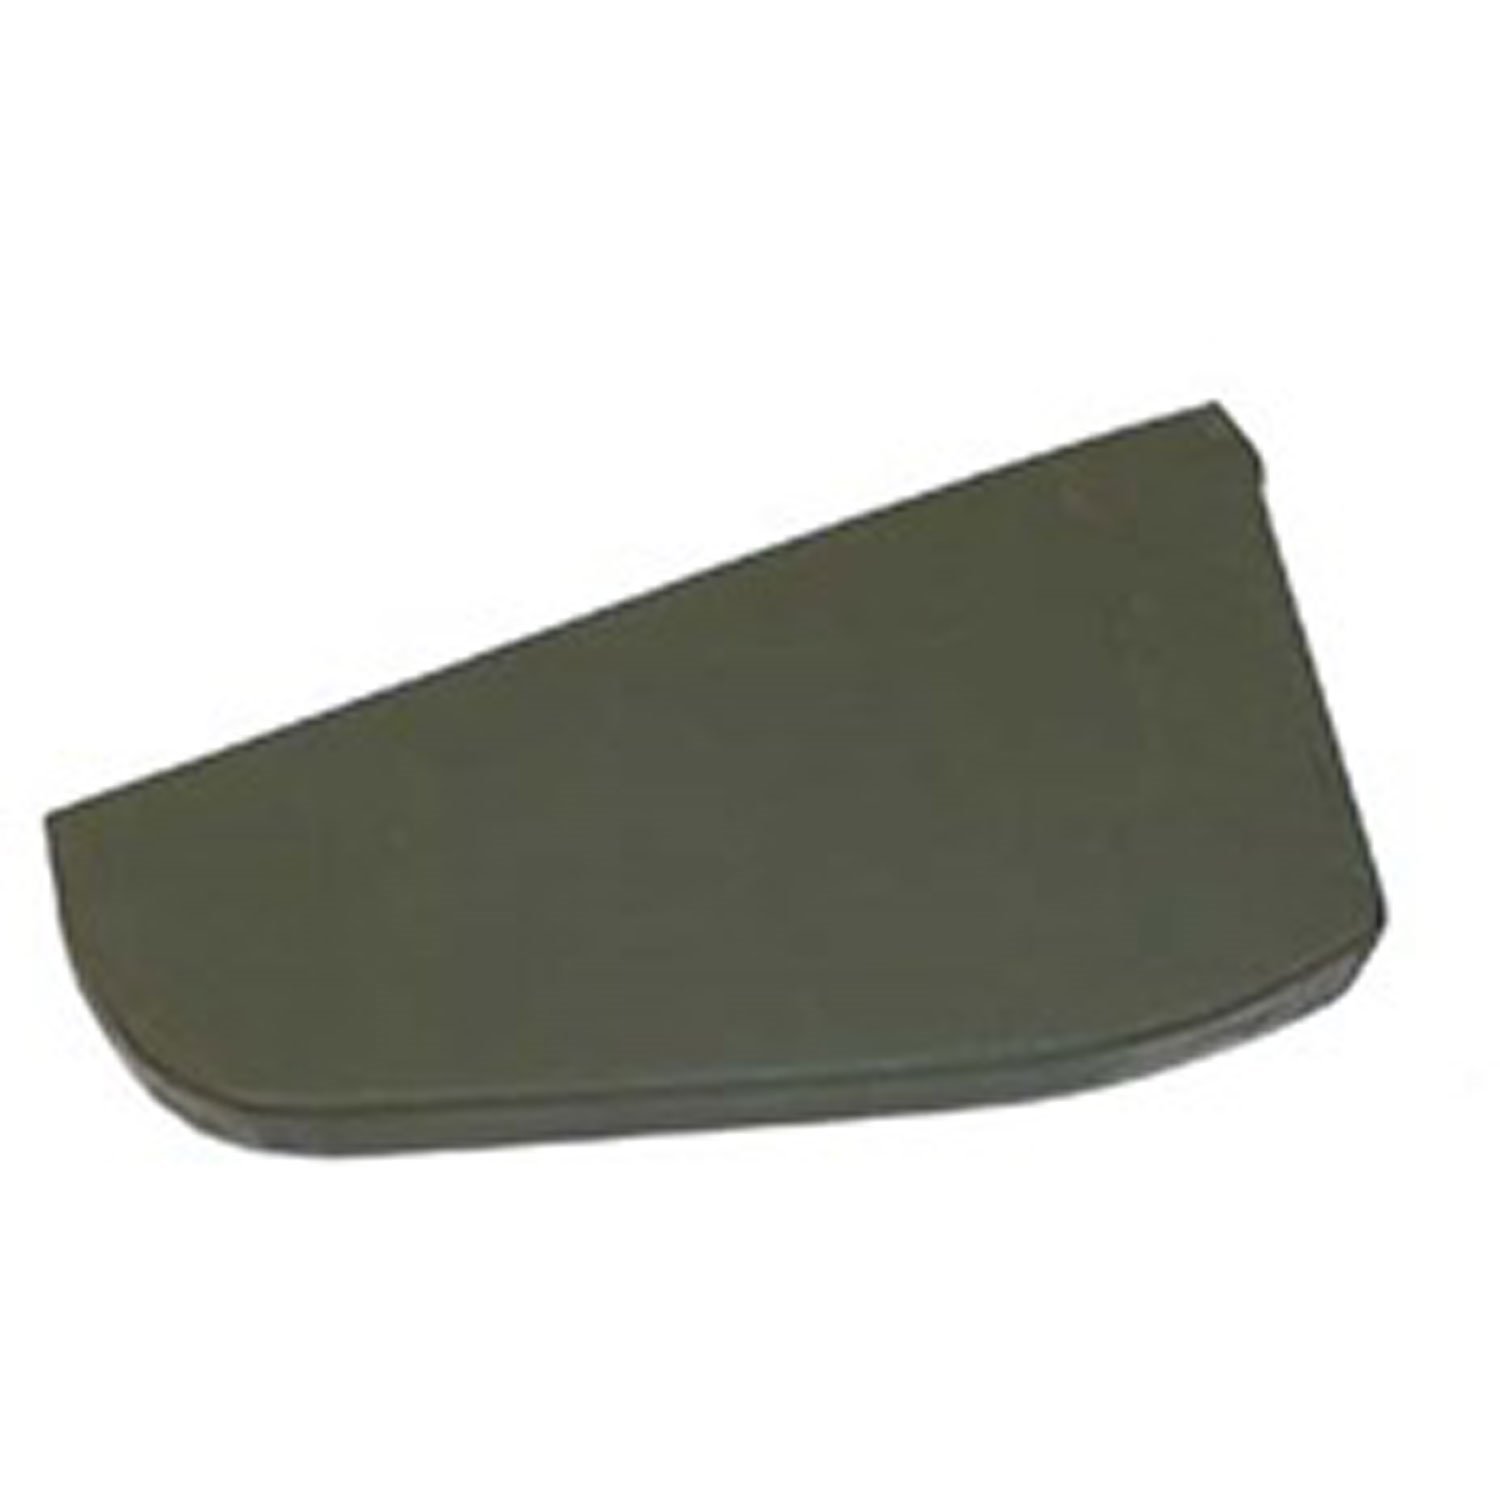 This right cowl side step from Omix-ADA fits 41-53 Willys models.